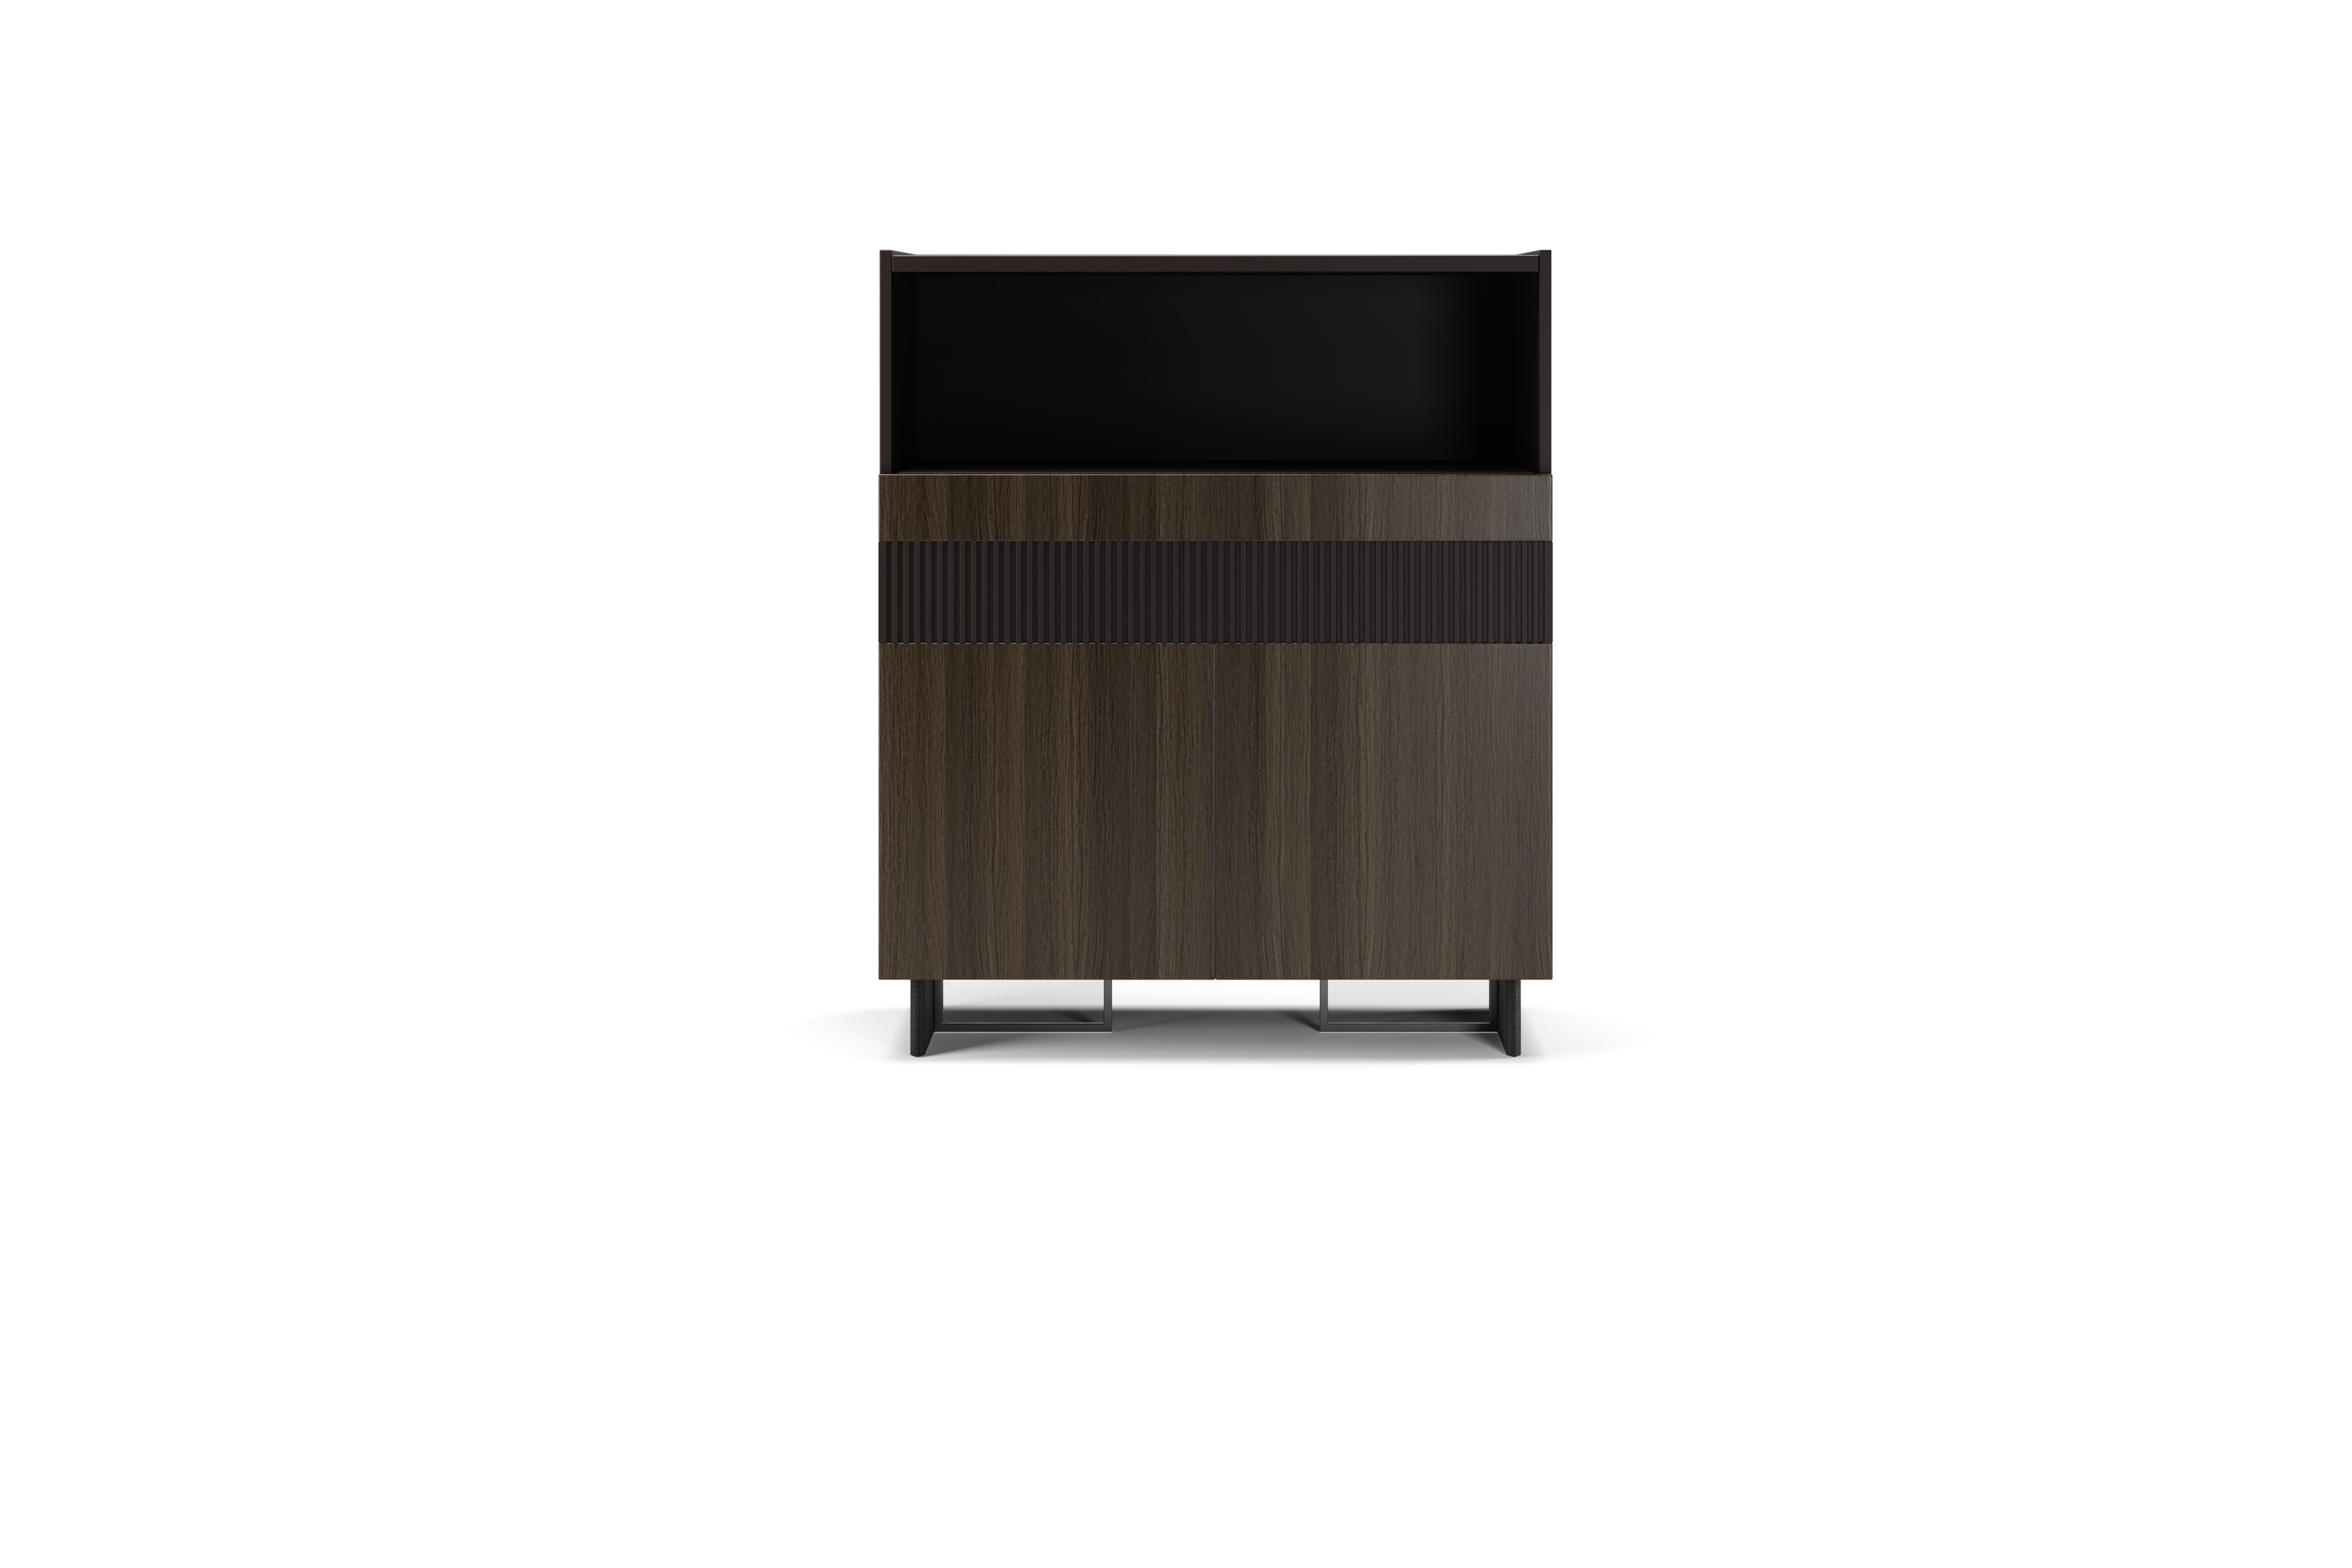 Diana, high sideboard with a veneered smoked gray oak structure. Day compartment, one milled lacquered drawer, one lacquered one and basement in metal frames covered in leather.

Diana is part of the 